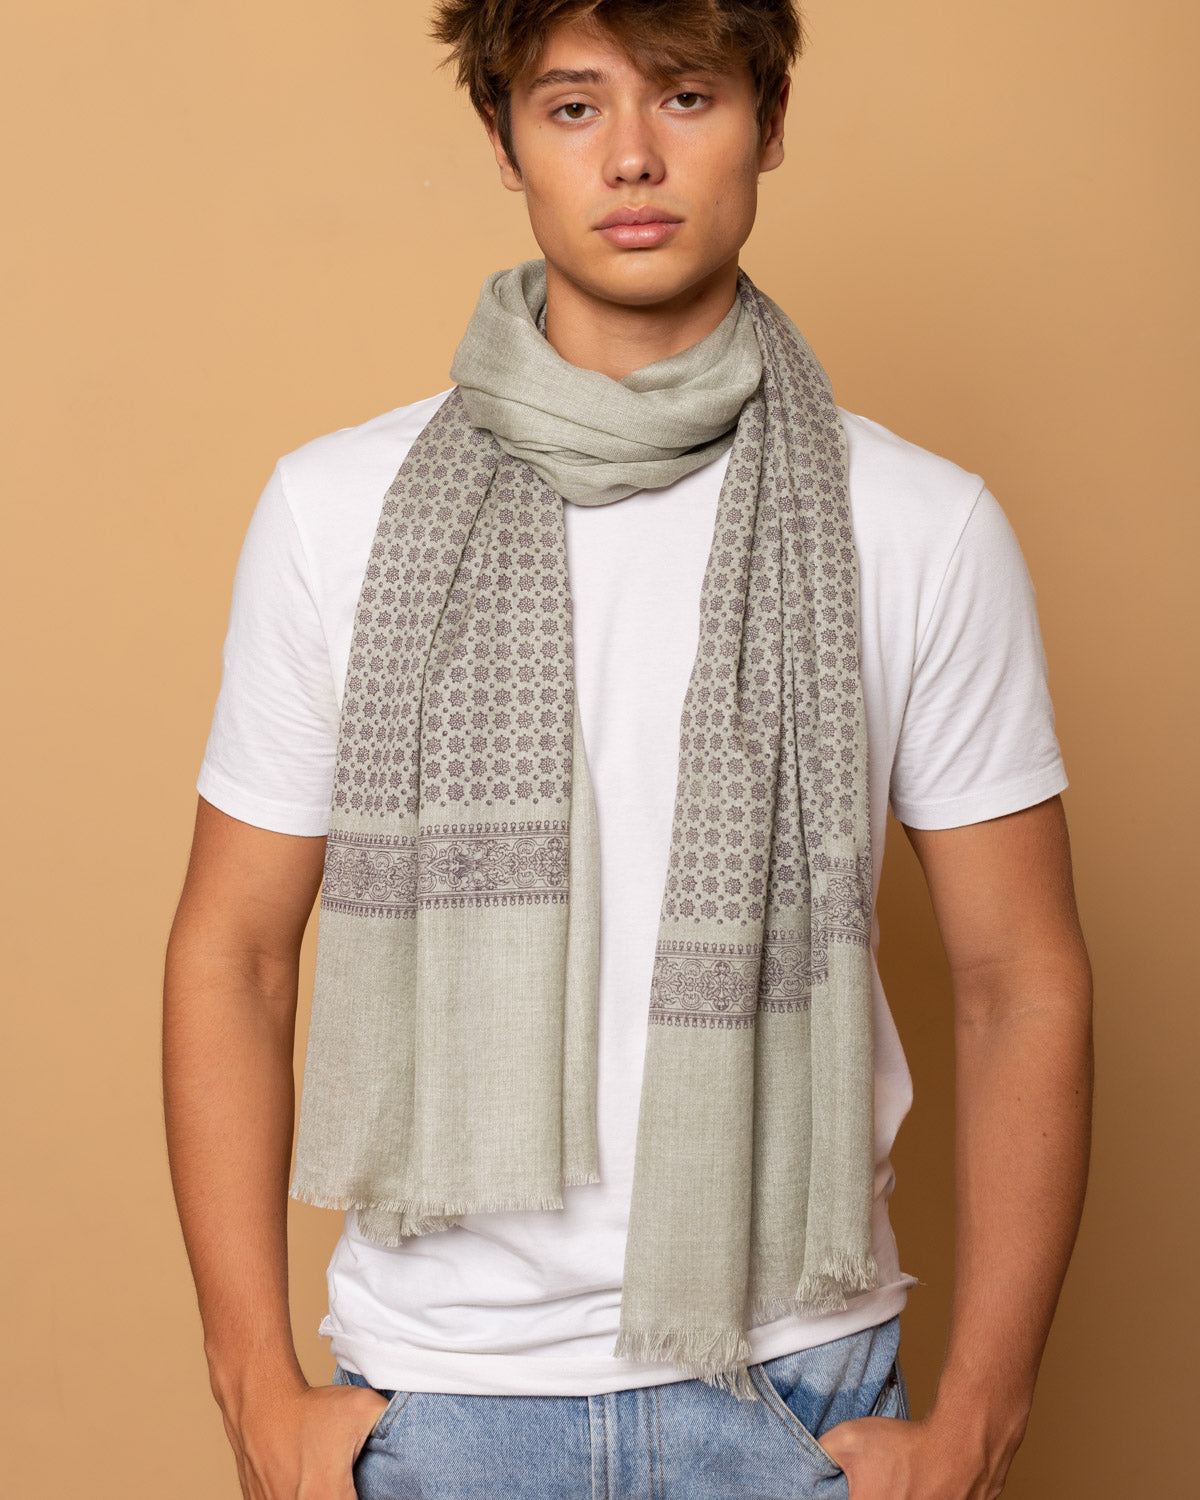 Hand-printed Wool and Modal Scarf in Lemon Grass color